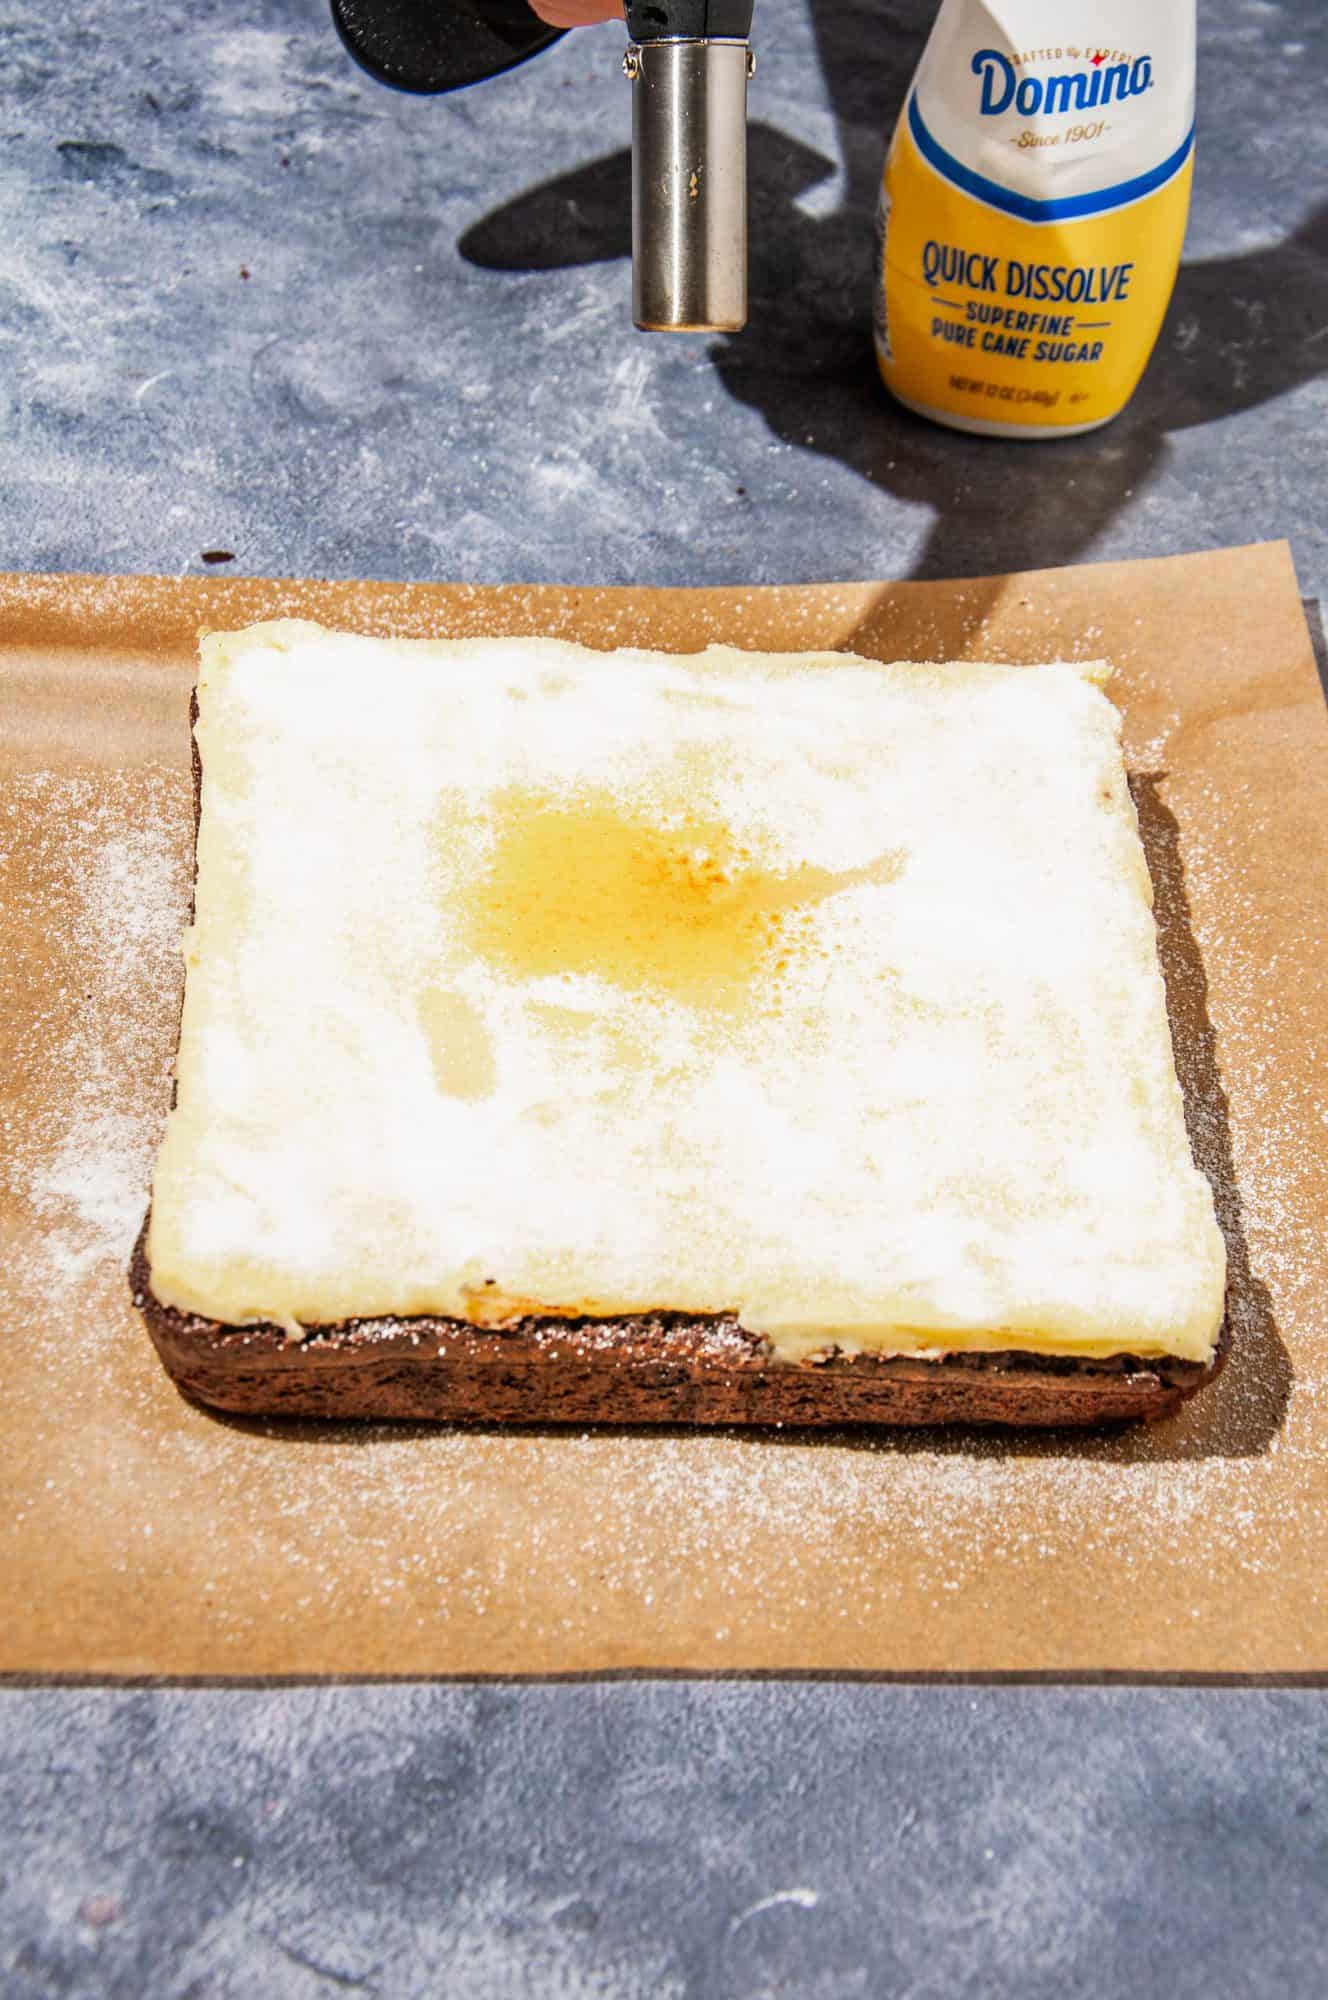 Creme brulee brownies covered in a thin layer of superfine sugar, beginning to turn golden from torch